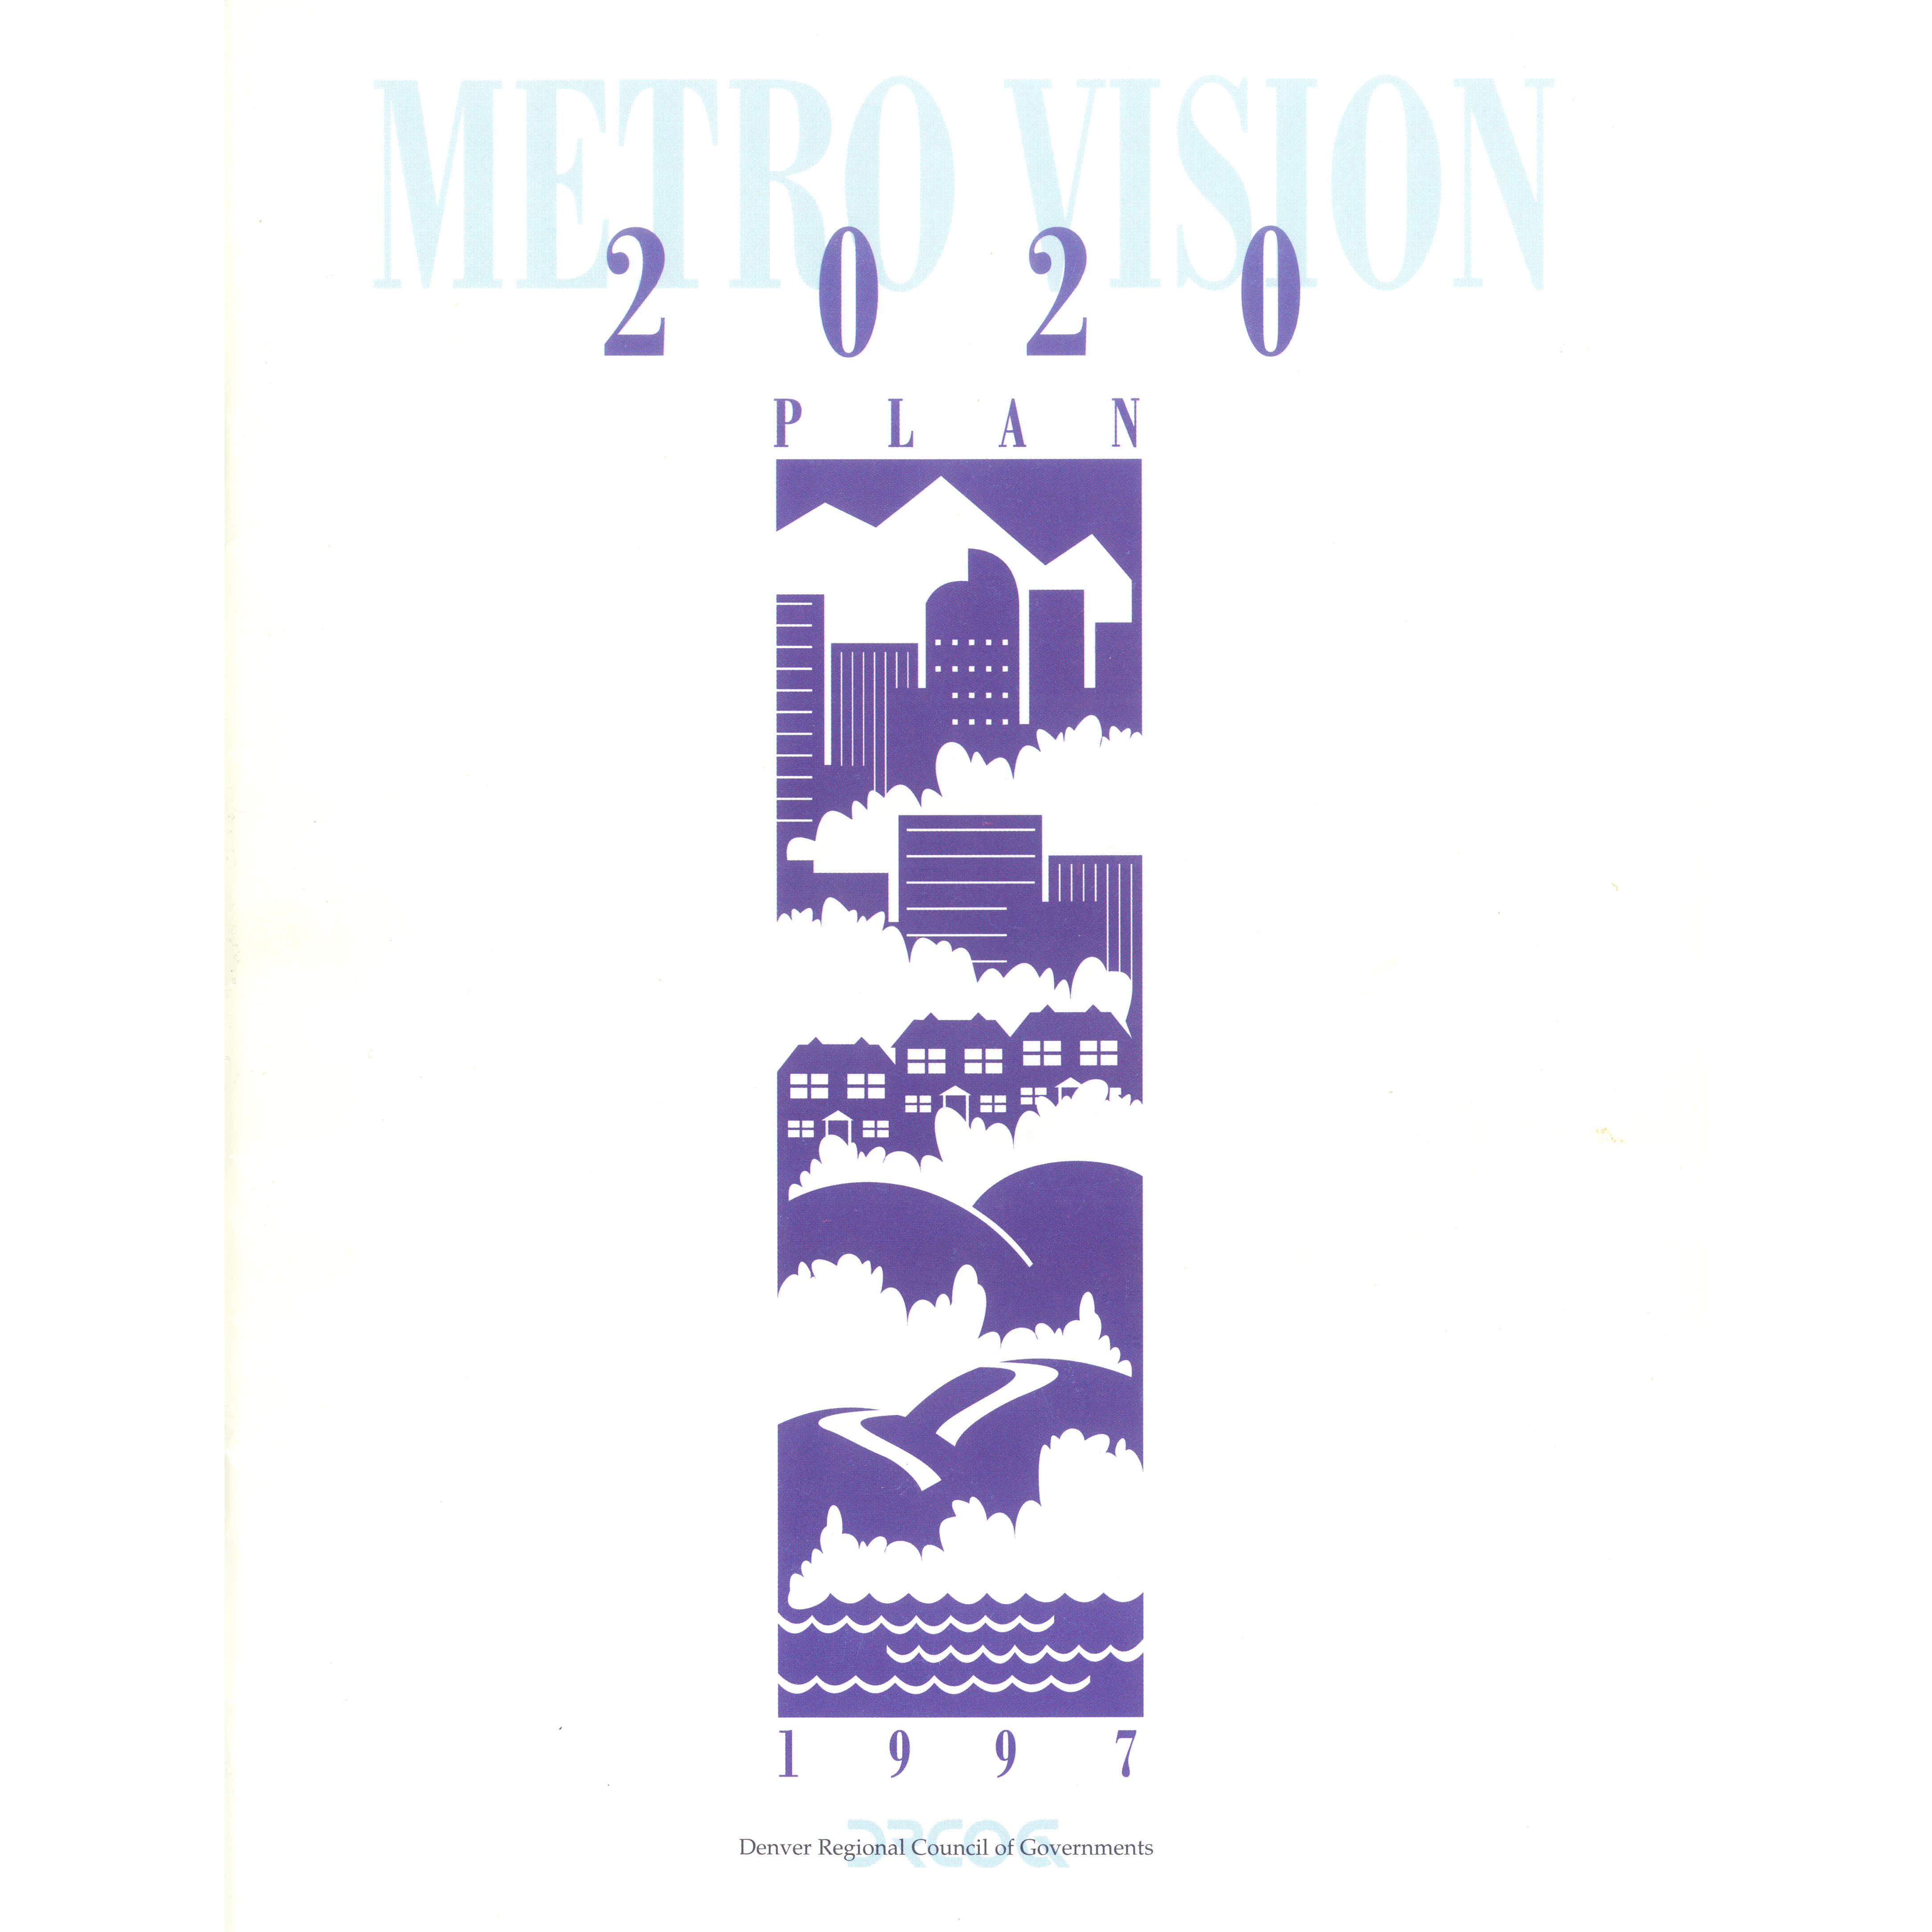 A report cover with a stylized city skyline, suburban homes and mountains and body of water. Words read Metro Vision 2020 Plan, with the date 1997.